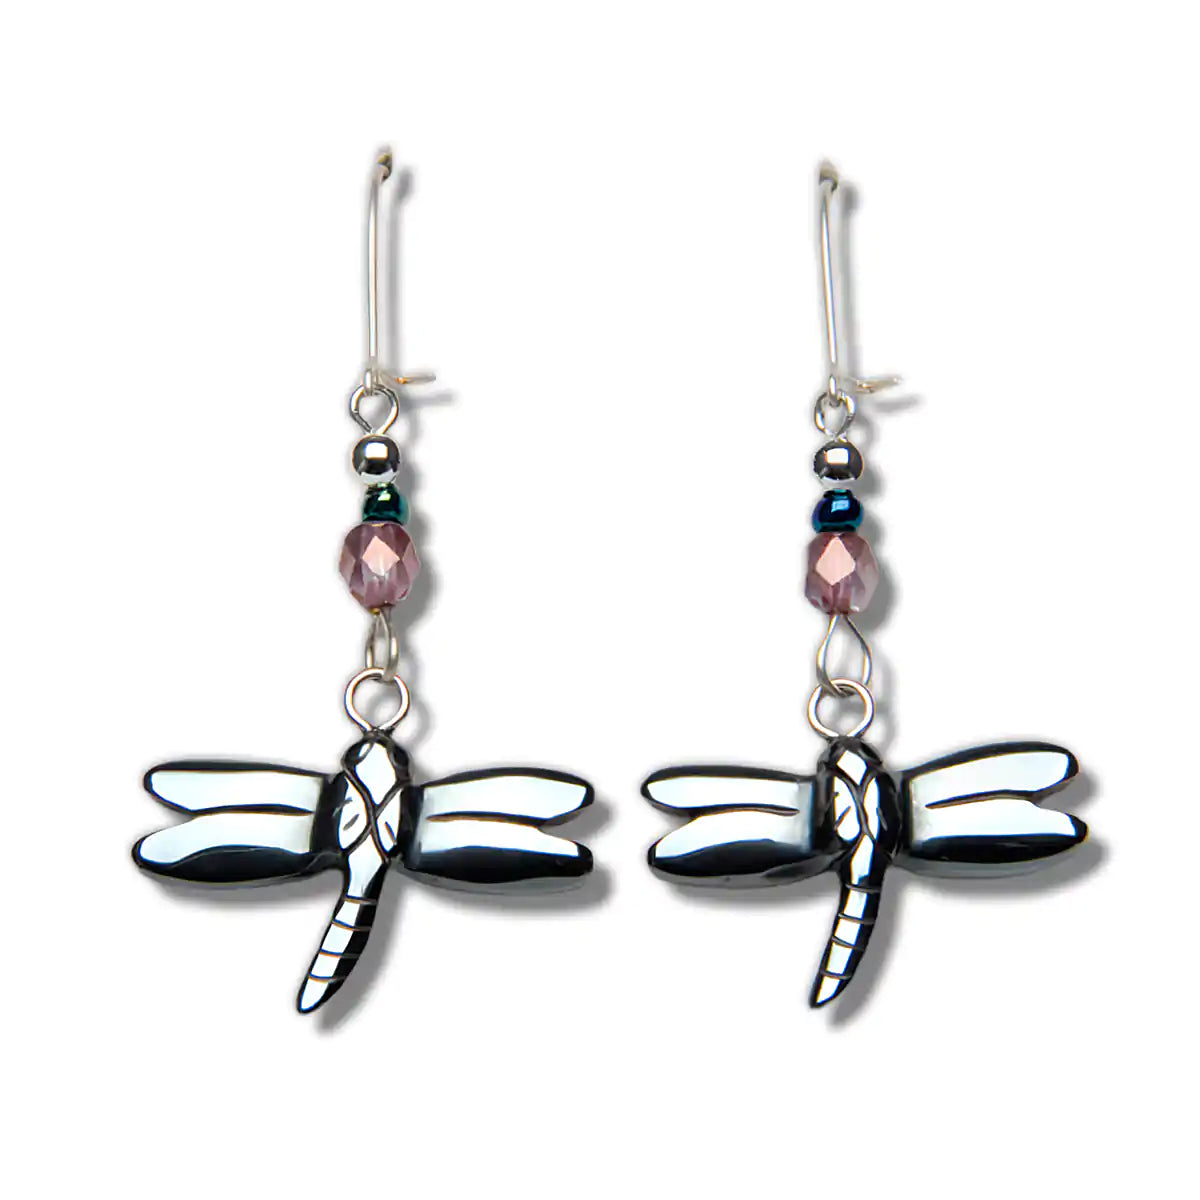 Hematite carved dragonfly earrings